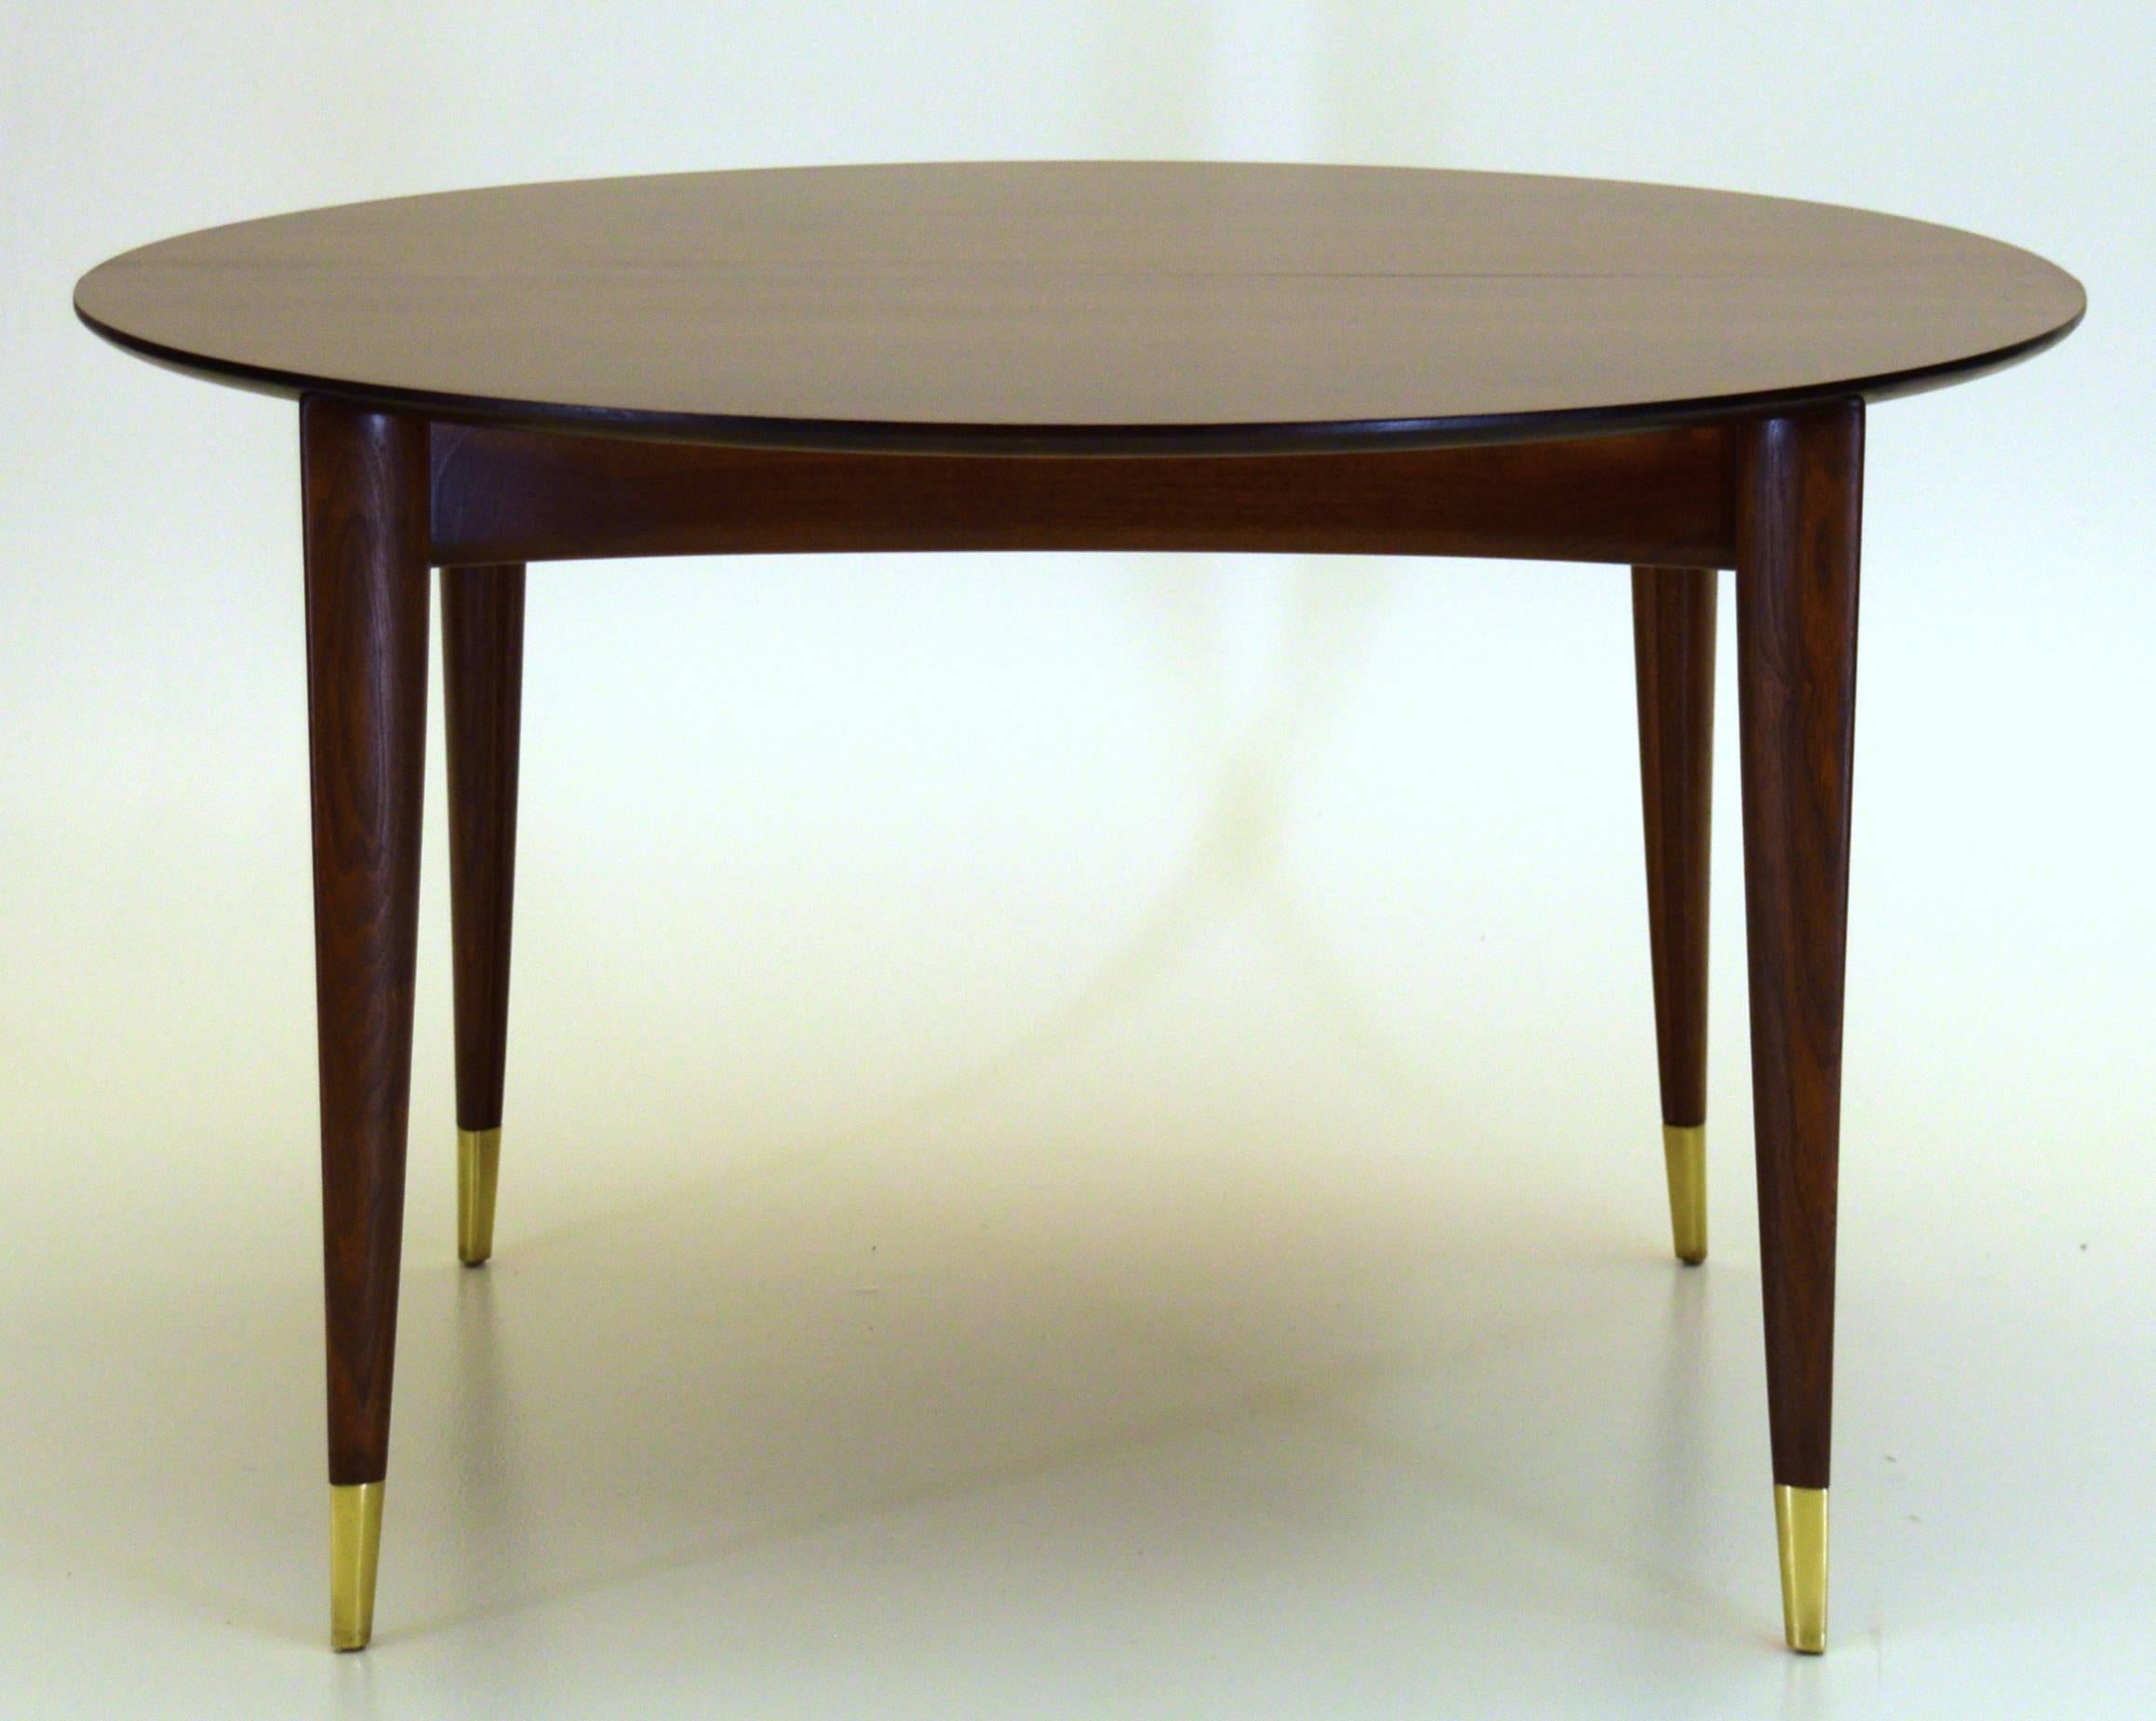 Gio Ponti dining Table.

Measures: 48" diameter and 29" tall.

Chairs available in separate listing. 

Produced in 40" and 48" presented here is the larger 48" model by Italian designer Gio Ponti, produced by M. Singer &